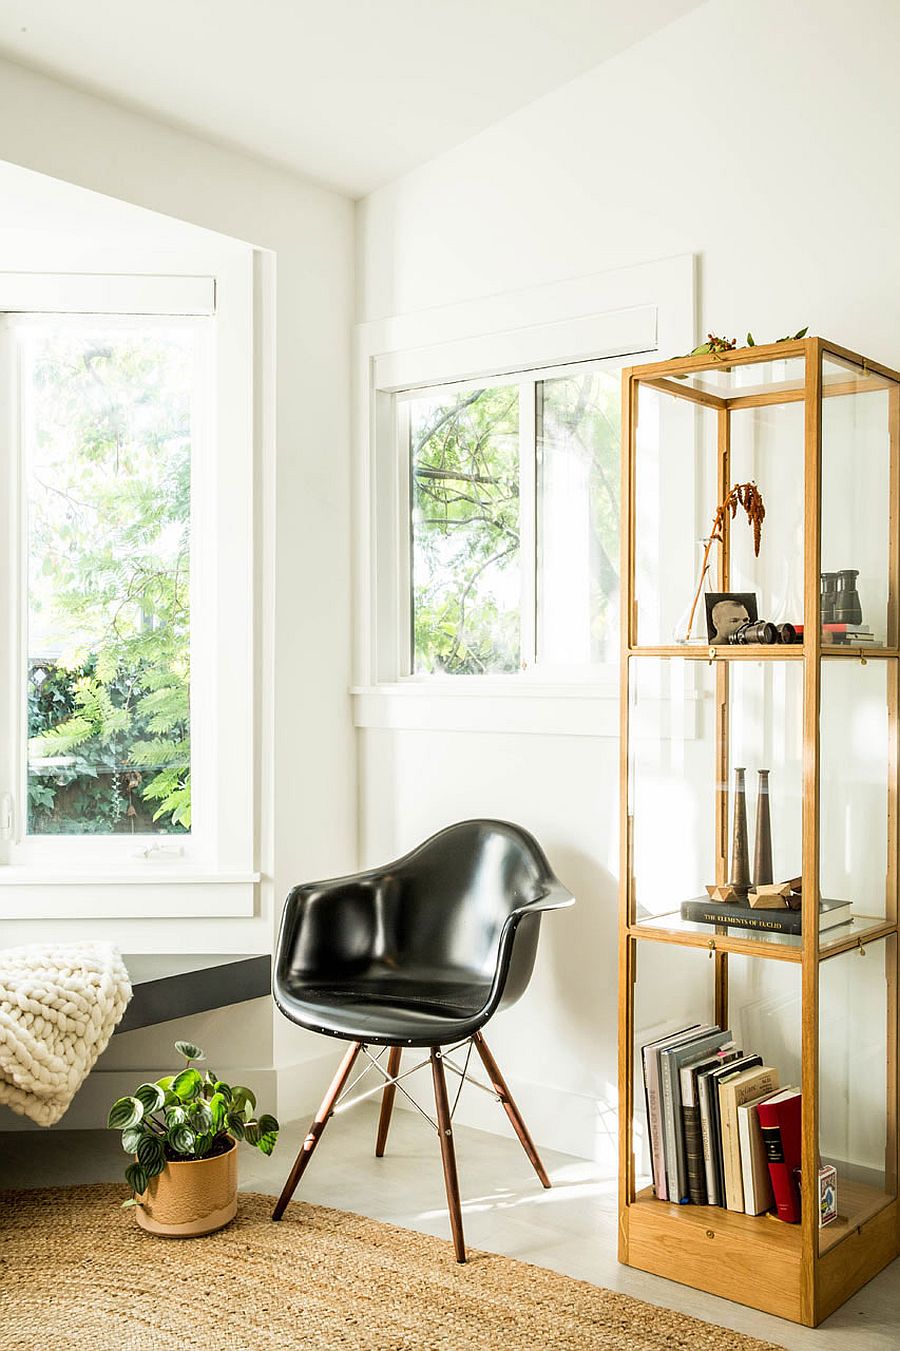 Classic-Eames-moulded-chair-and-glass-bookshelf.jpg